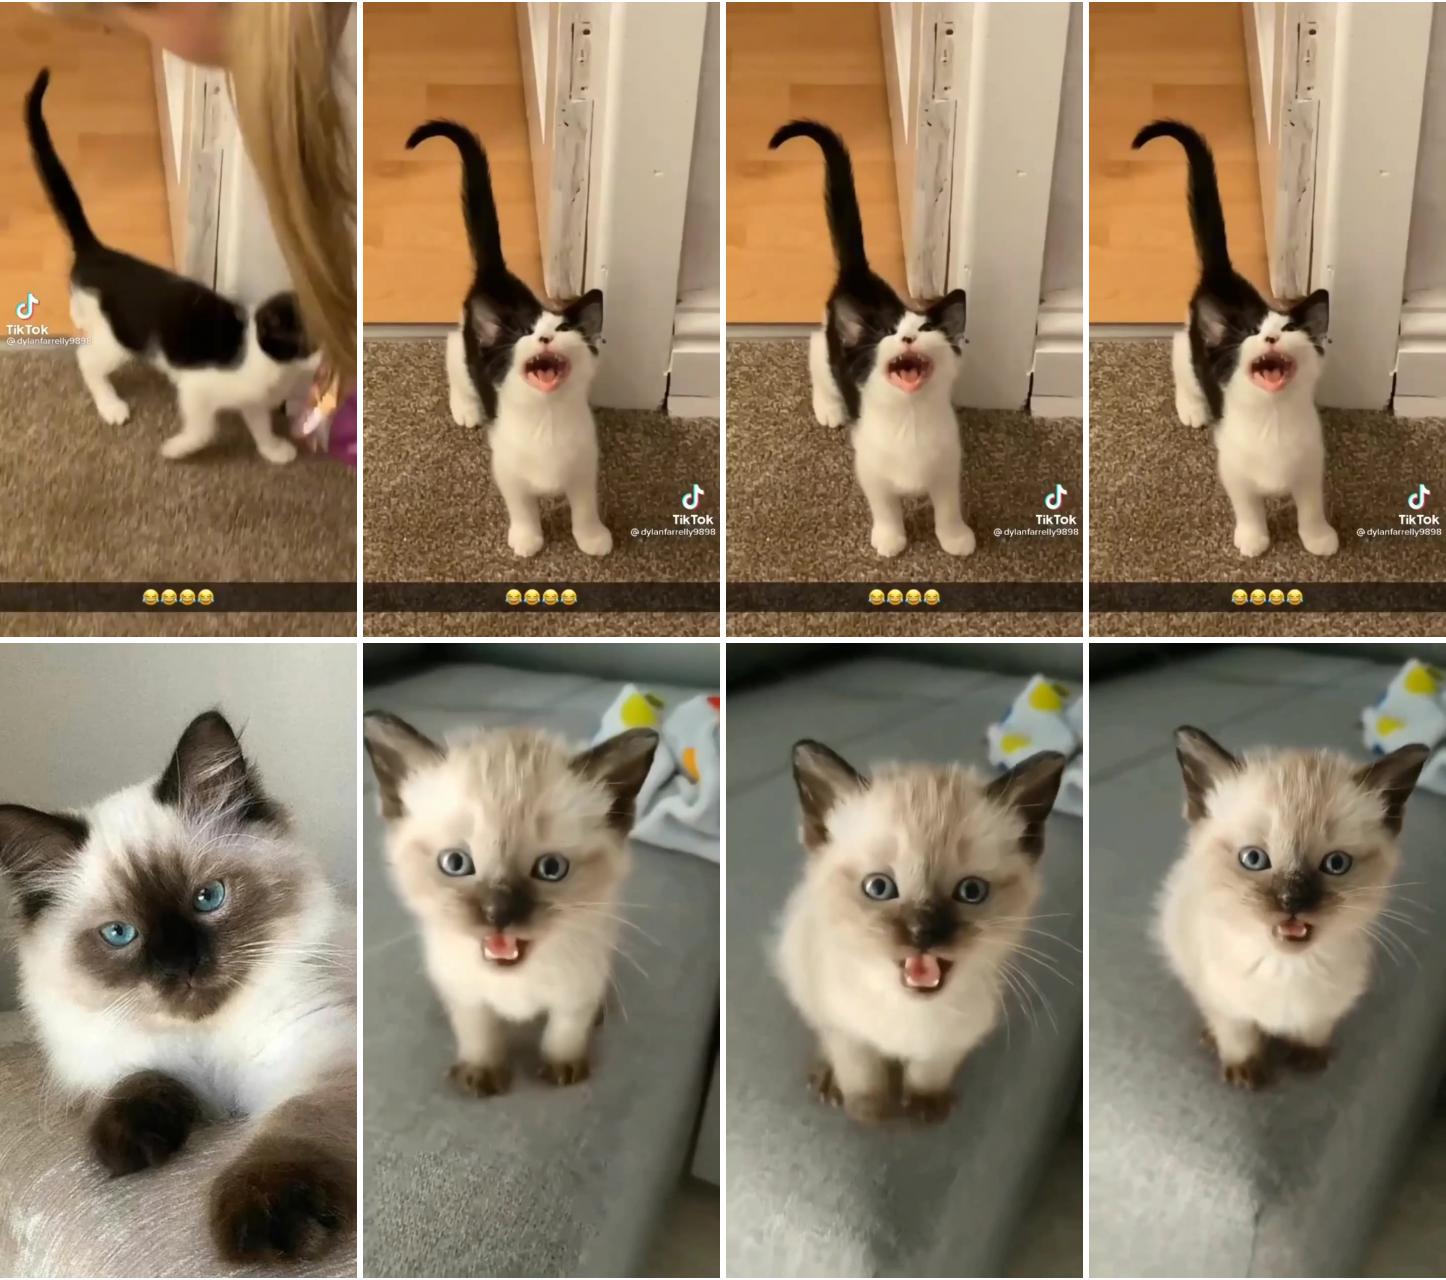  hungry; adorable siamese kitten's sweet plea for food from dad 